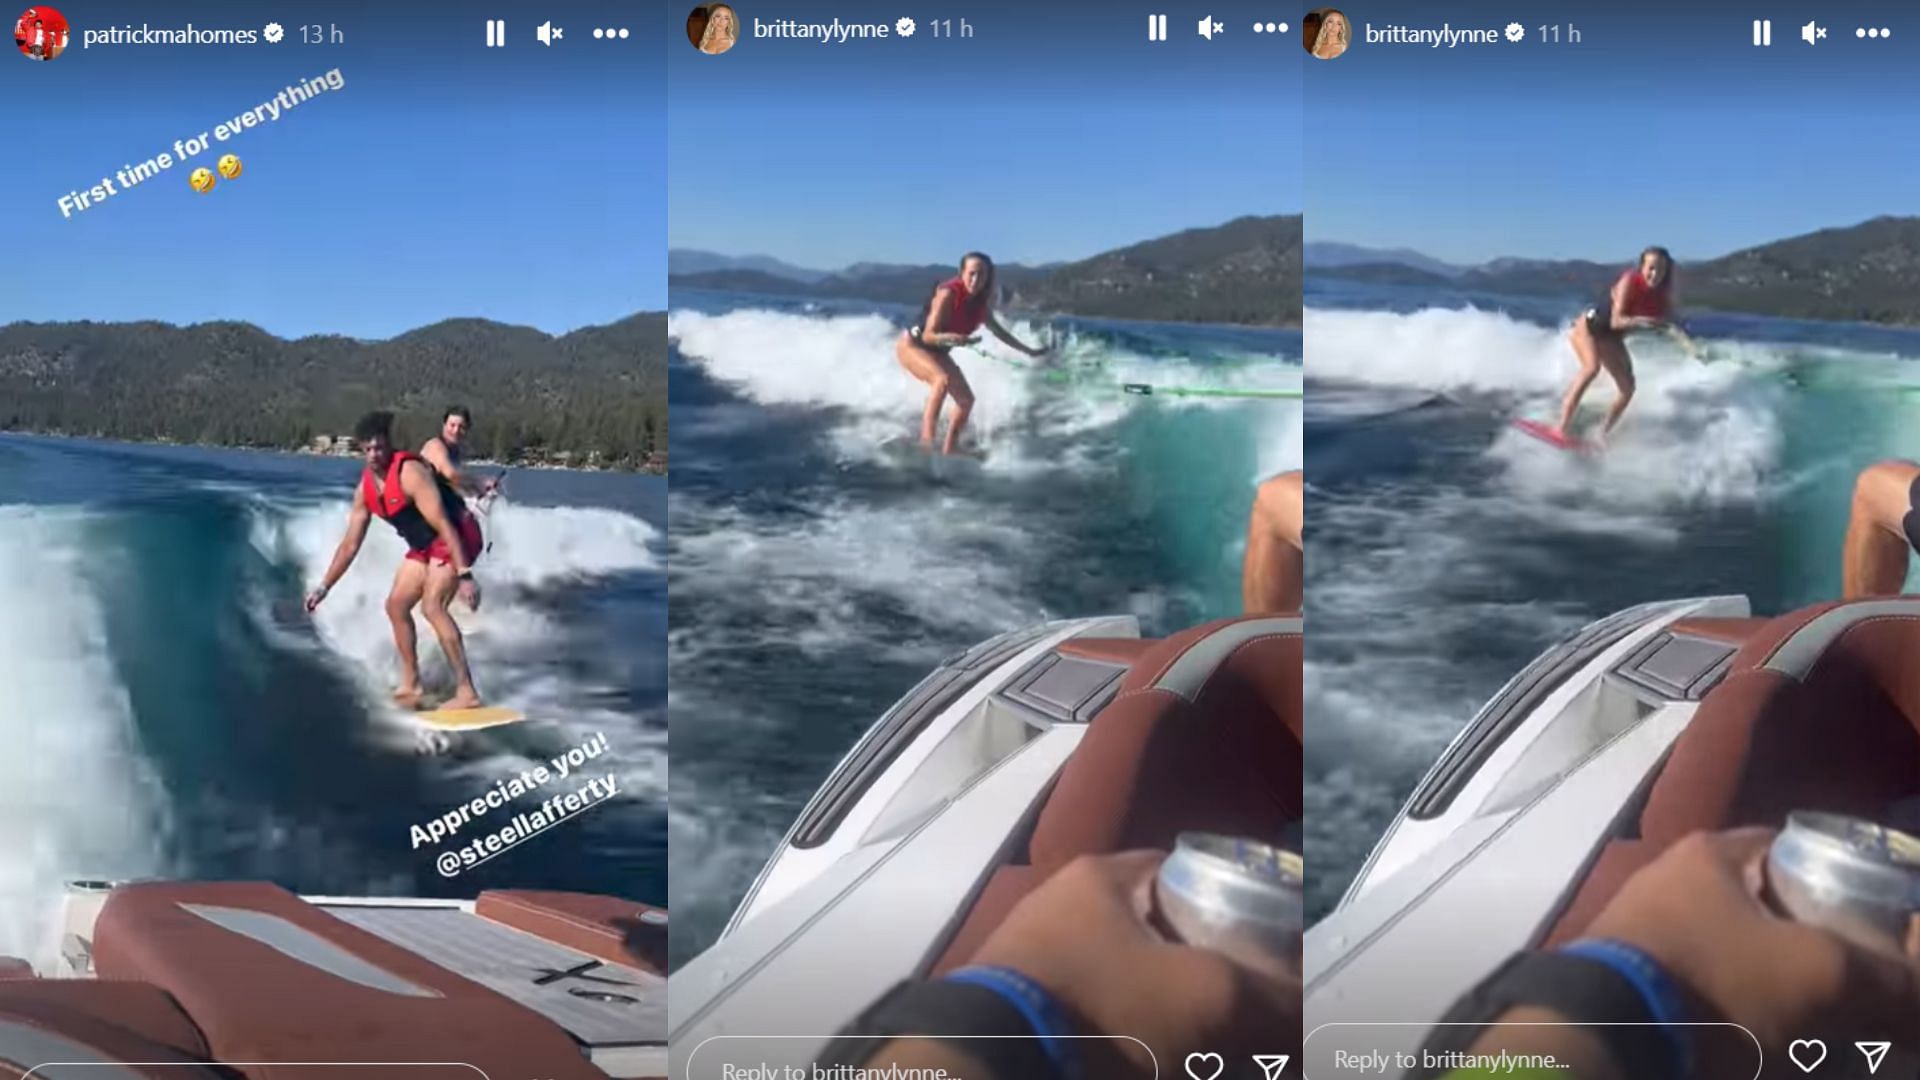 Patrick Mahomes and Brittany try wake surfing for the first time and enjoy doing so (Image Credit: Patrick Mahomes&#039; and Brittany Mahomes&#039; Instagram Story).